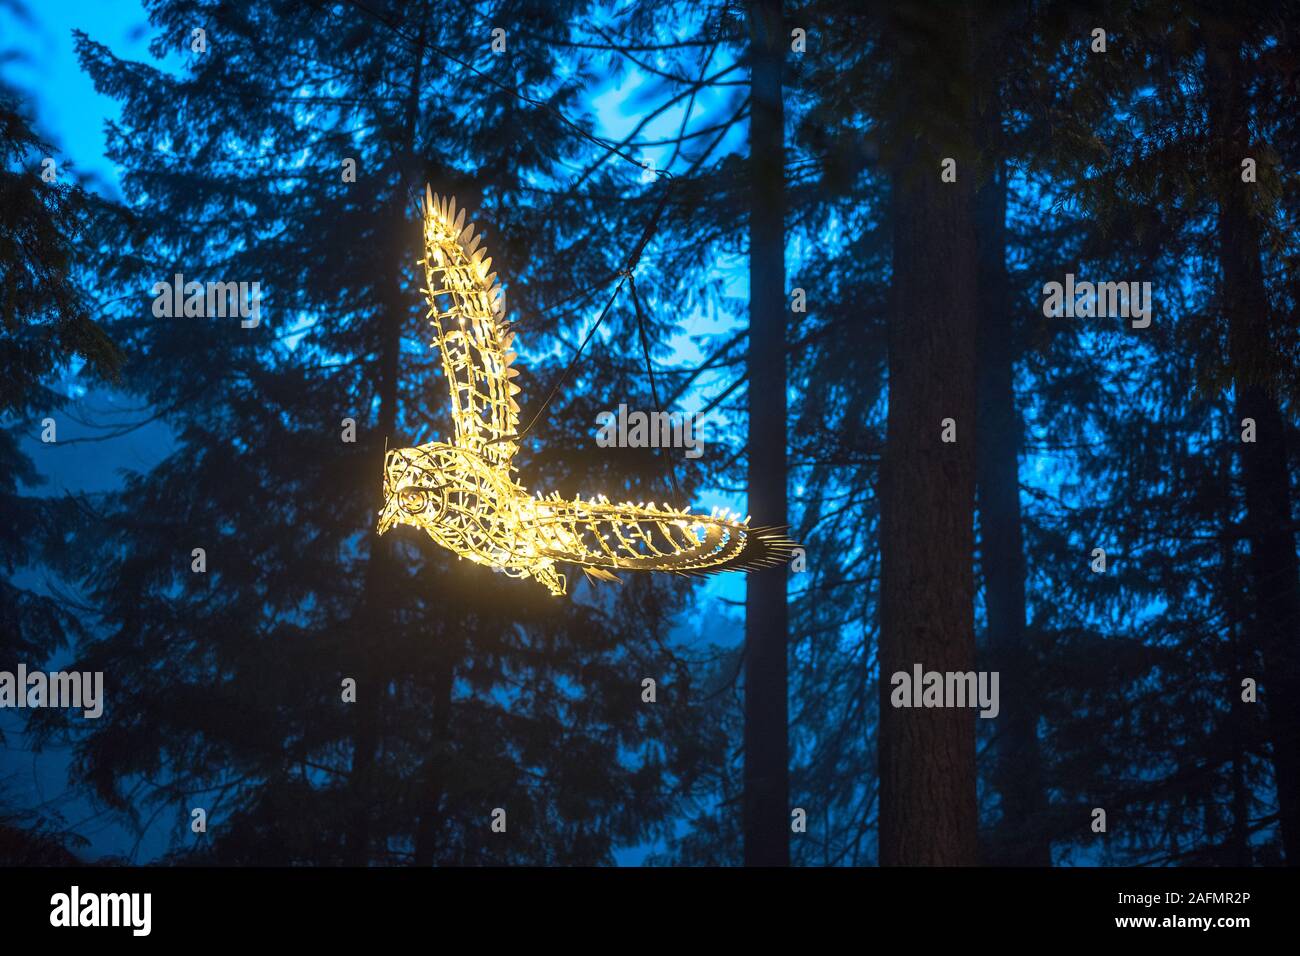 An owl made from lights hanging from a tree in Capilano Suspension Bridge Park Stock Photo